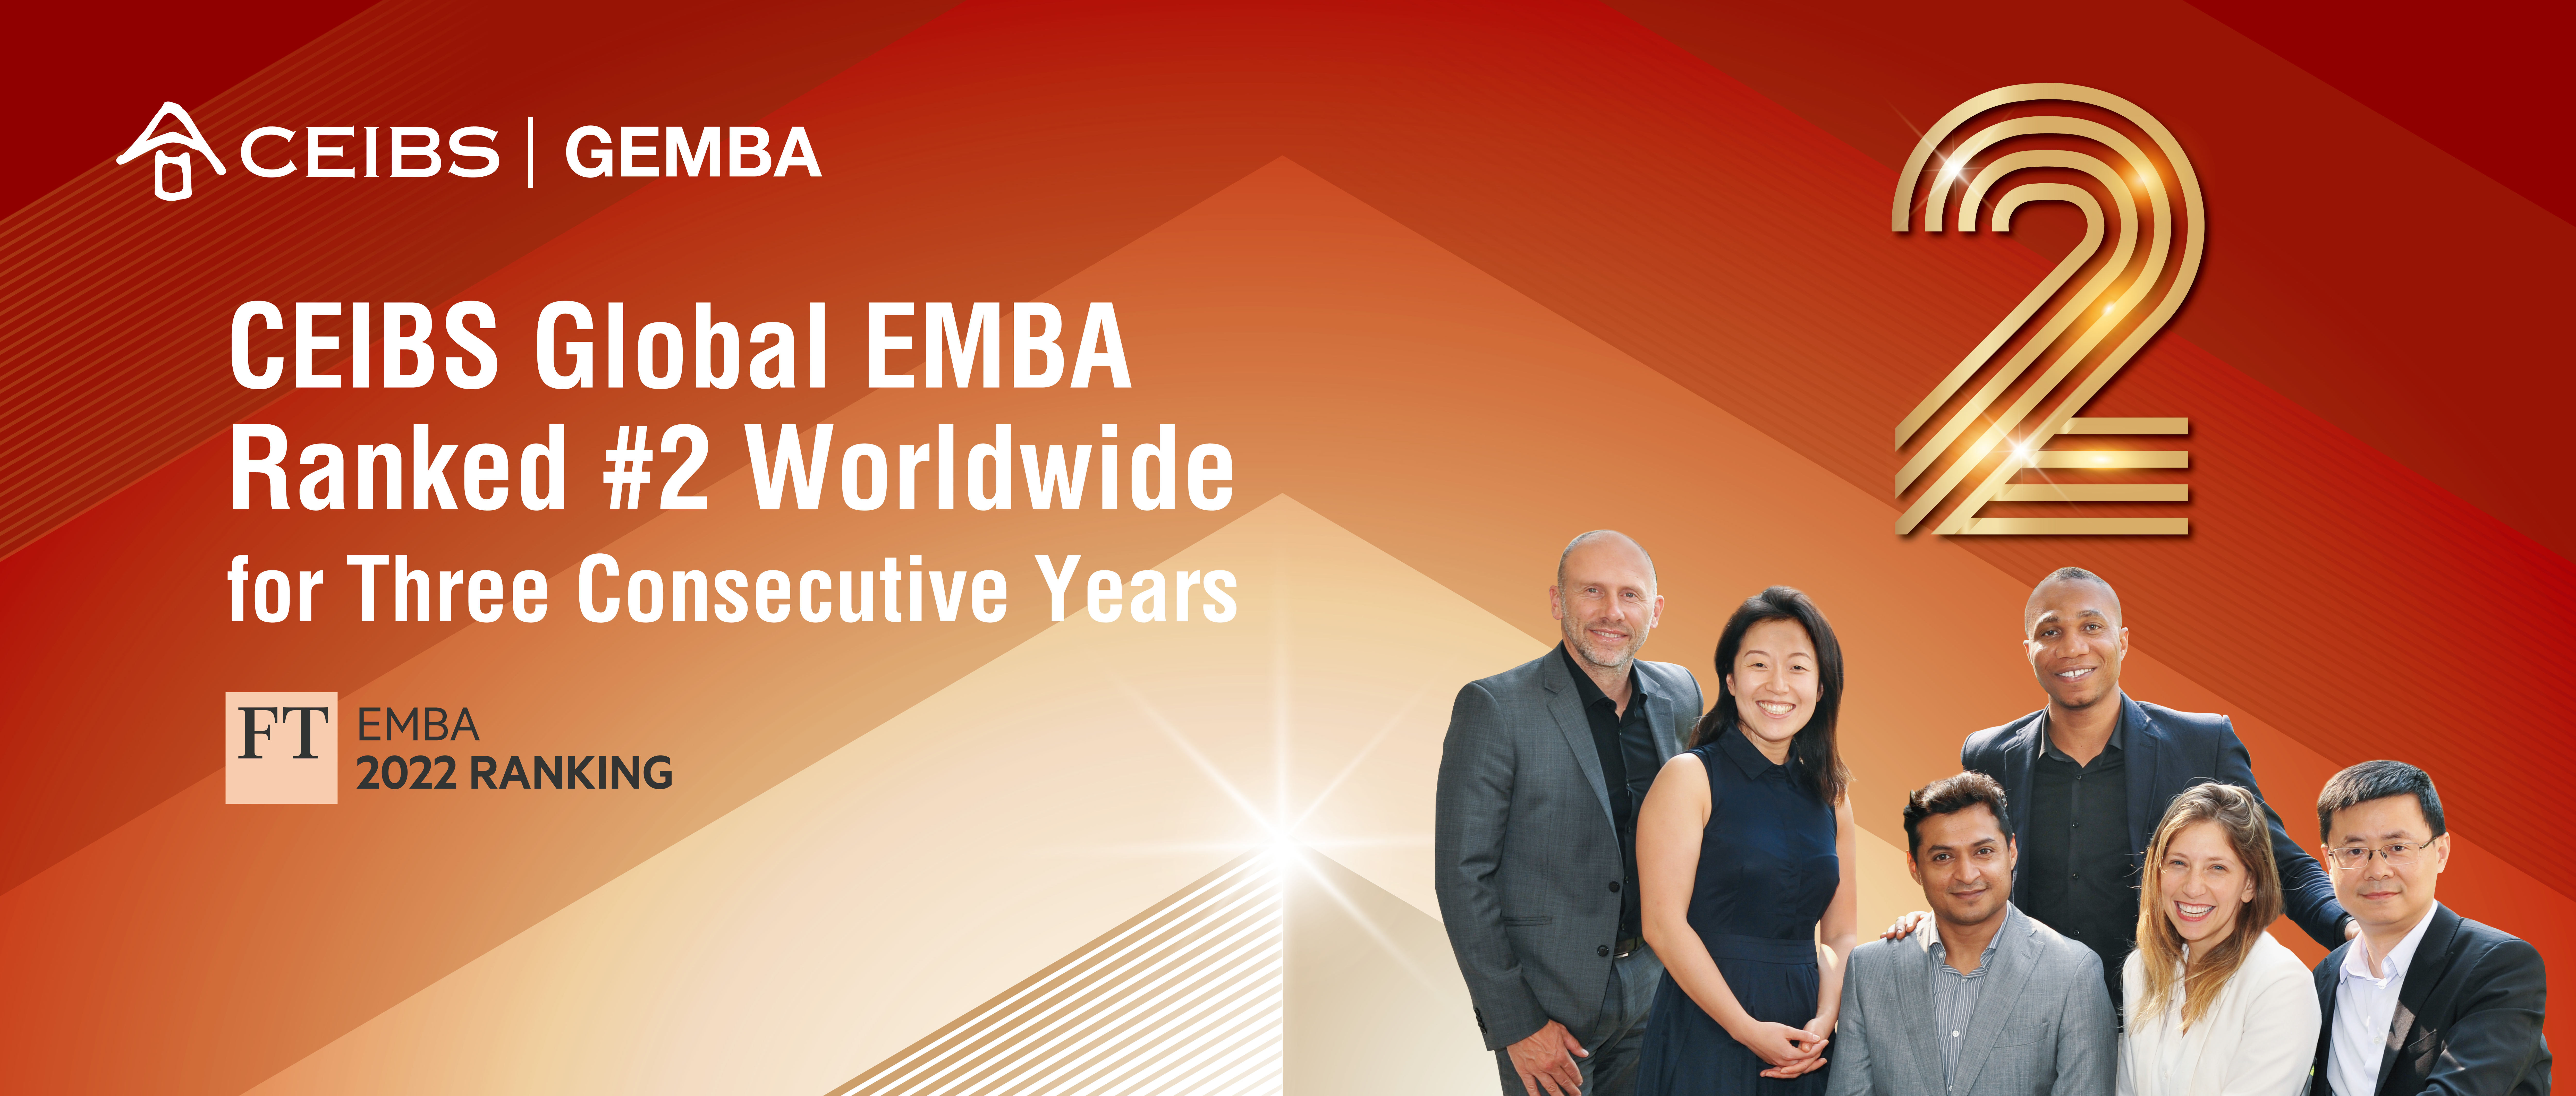 CEIBS Global EMBA Ranked No.2 worldwide for three consecutive years